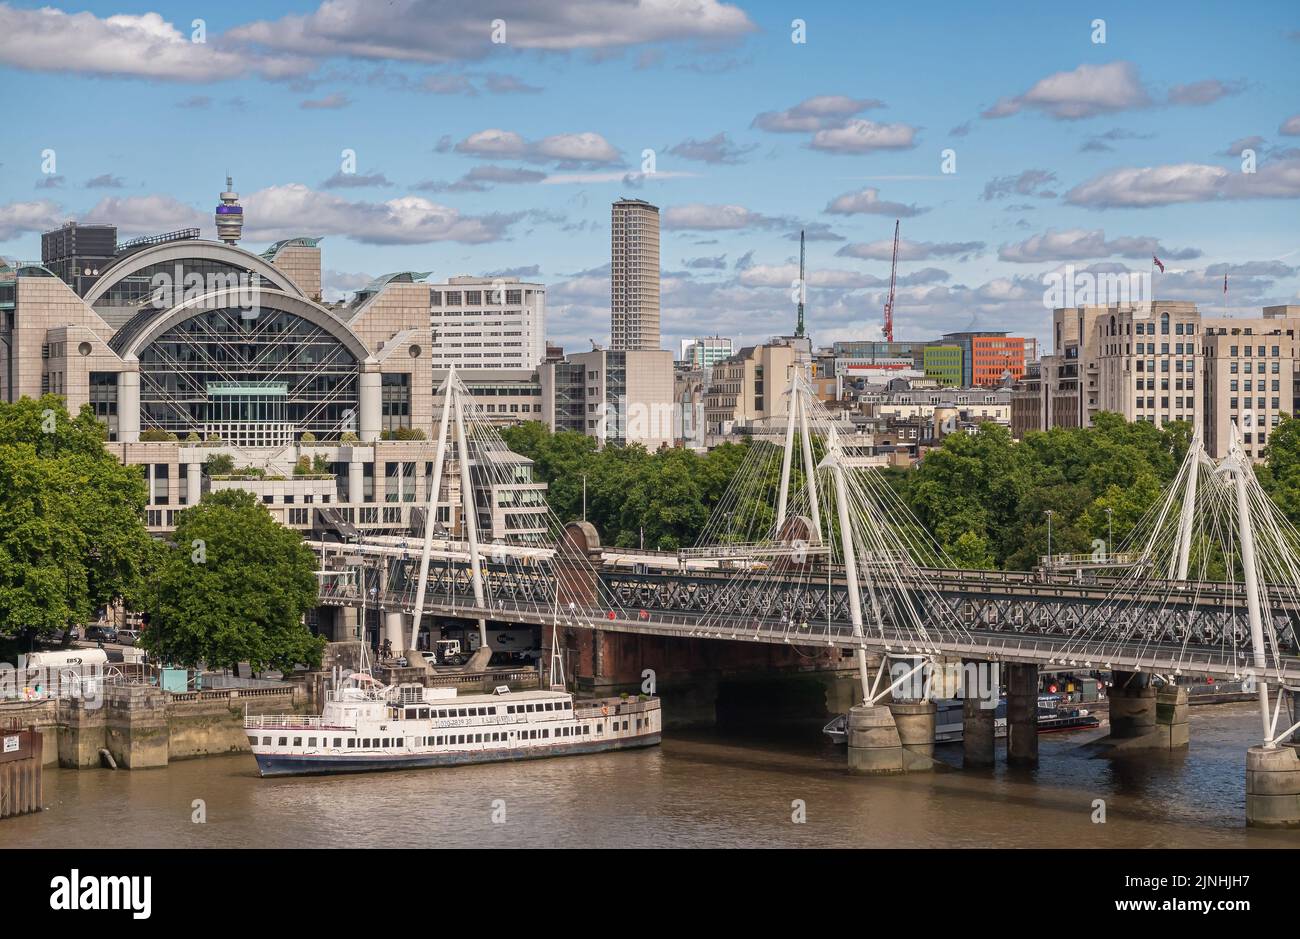 London, UK - July 4, 2022: Cityscape focus on Sharing Cross railway station with Hungerford and Golden Jubilee bridges crosseing brown water Thames Ri Stock Photo